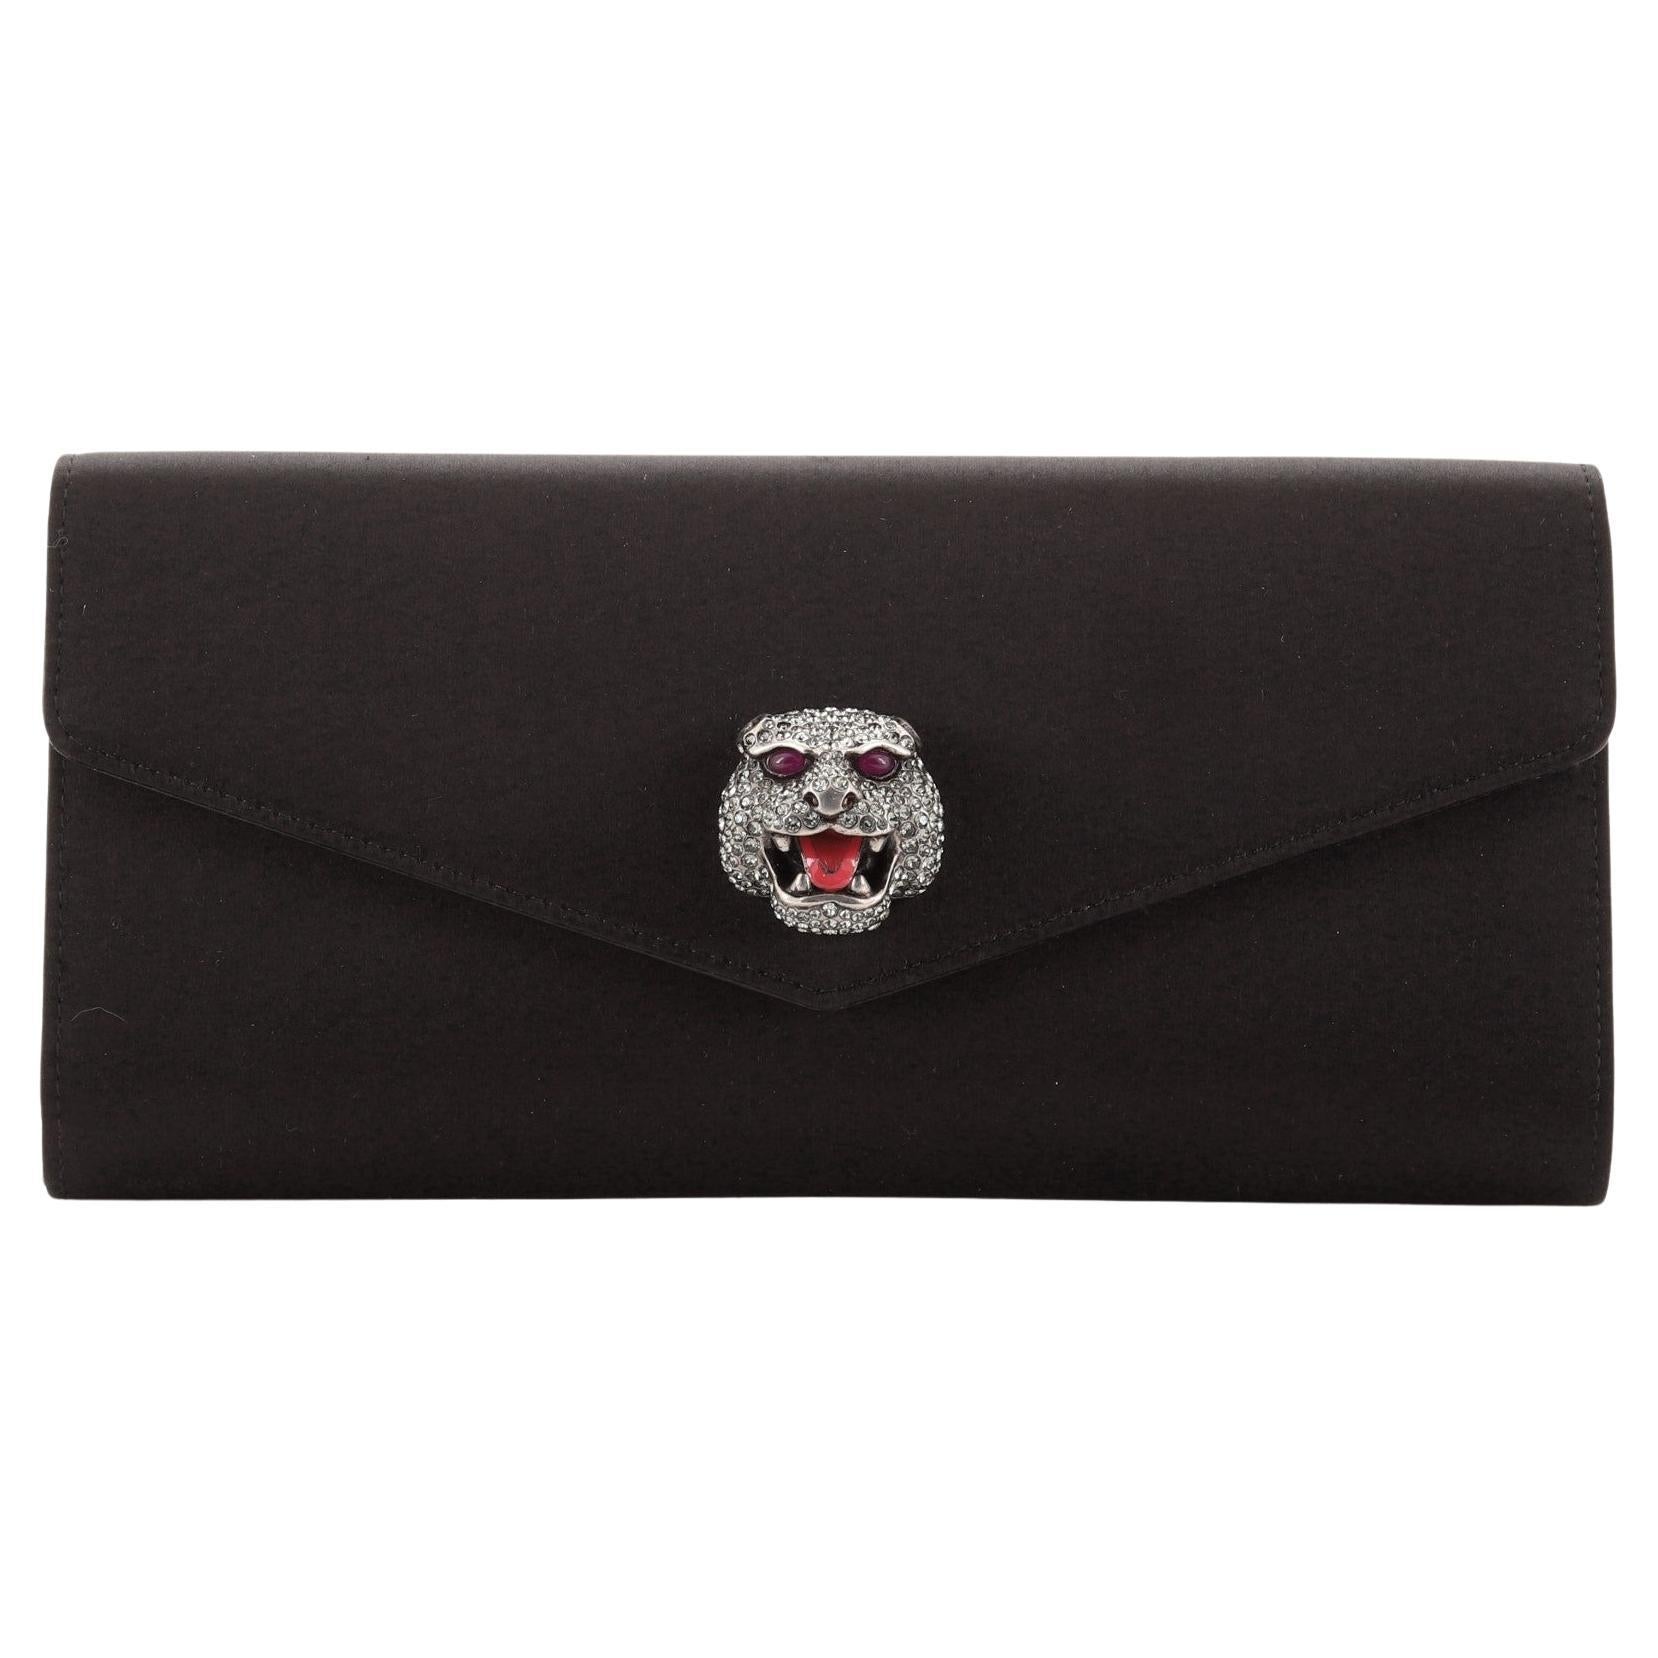 Gucci Tiger Broadway Envelope Clutch Satin with Crystals